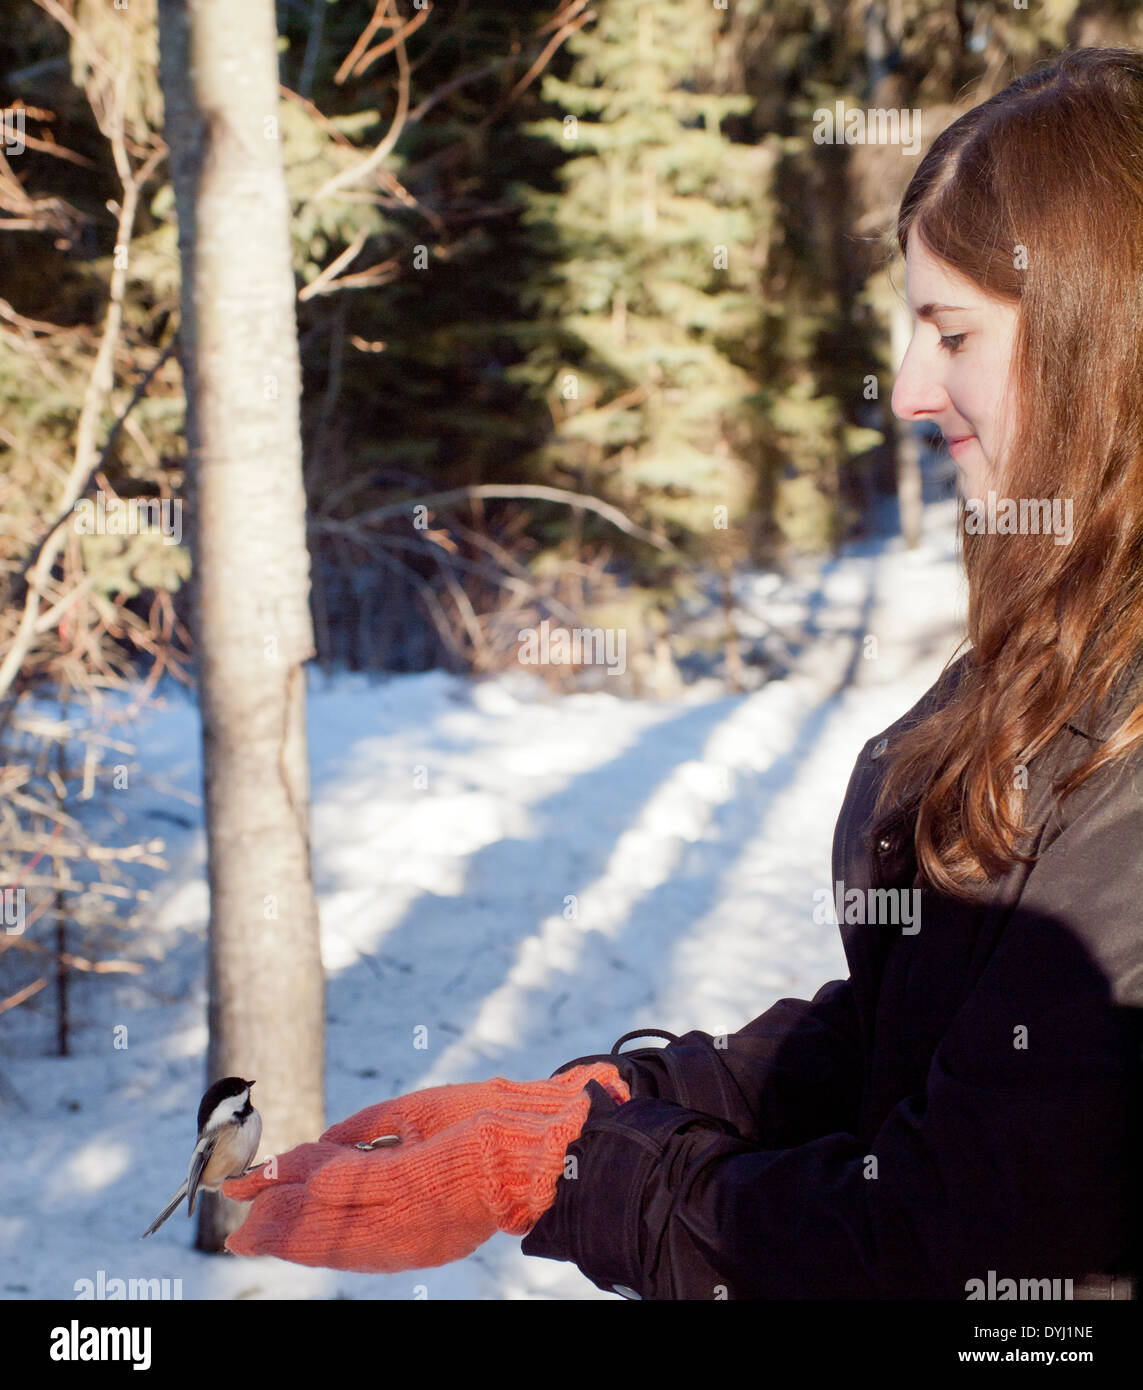 A wild Black-capped Chickadee (Poecile atricapillus) feeds out of the hands of a pretty brunette girl in Edmonton, Canada. Stock Photo